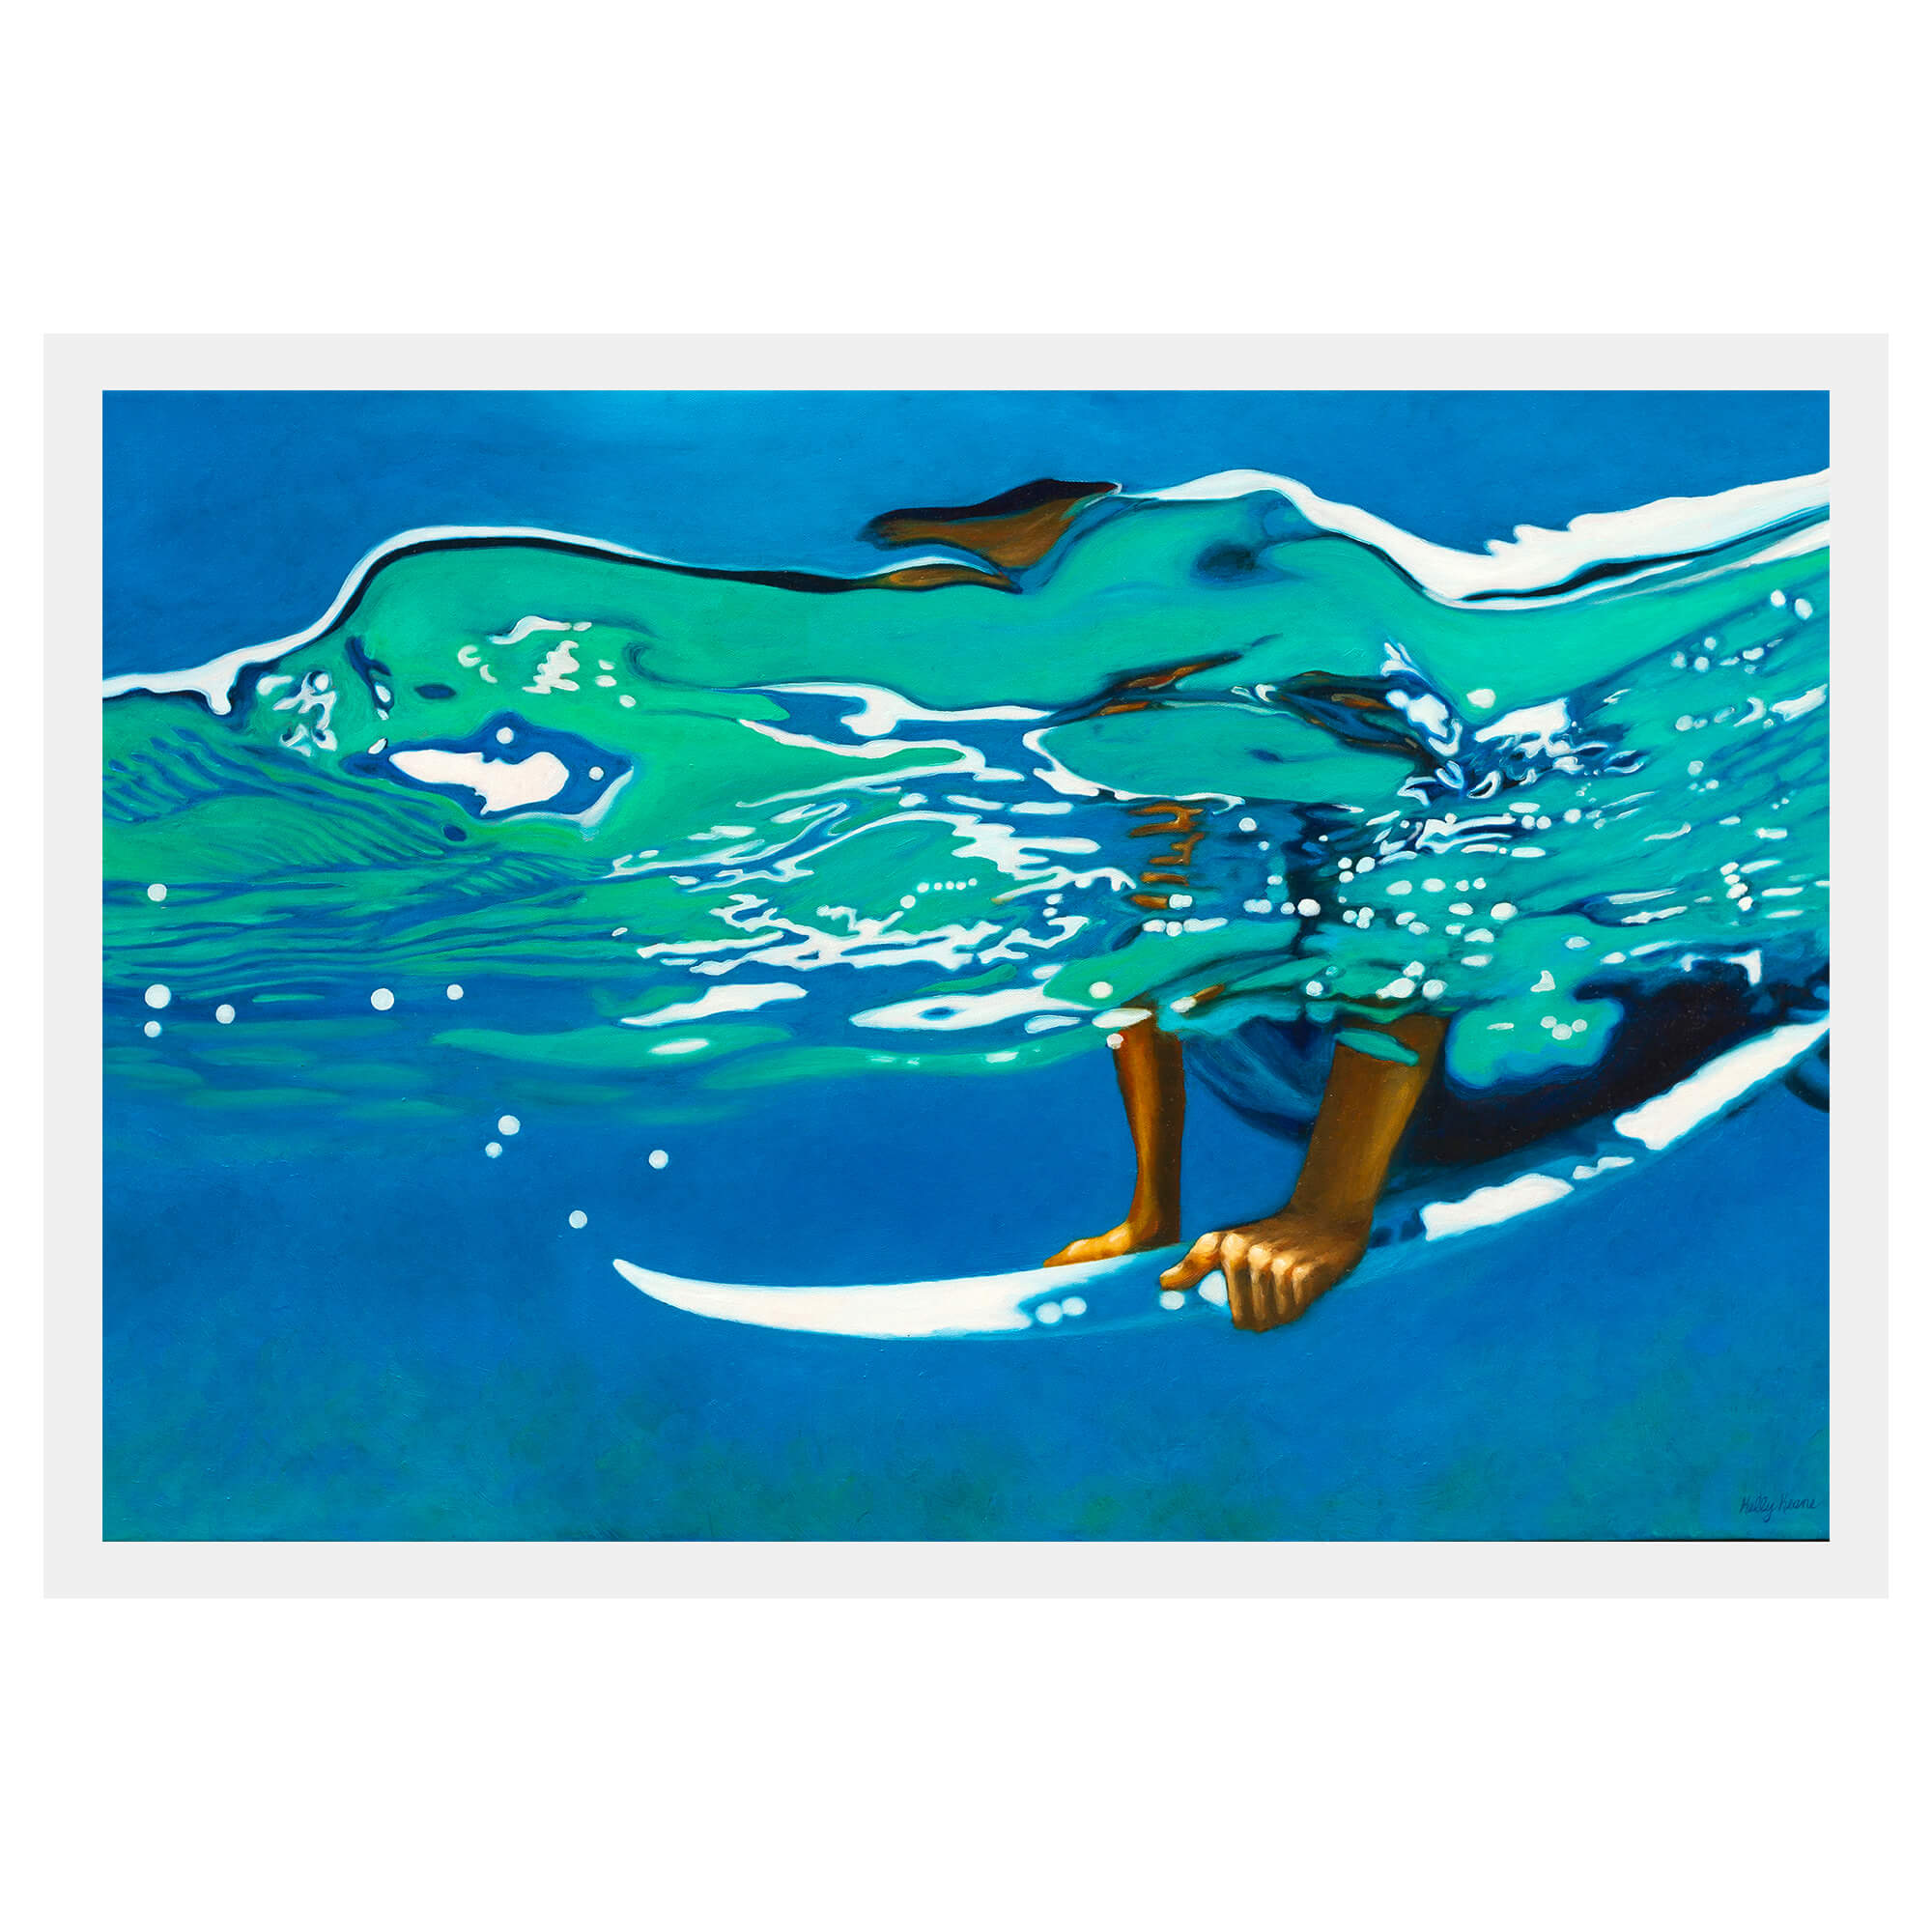 Paper art print of a person on a surfboard going towards large crashing waves by Hawaii artist Kelly Keane